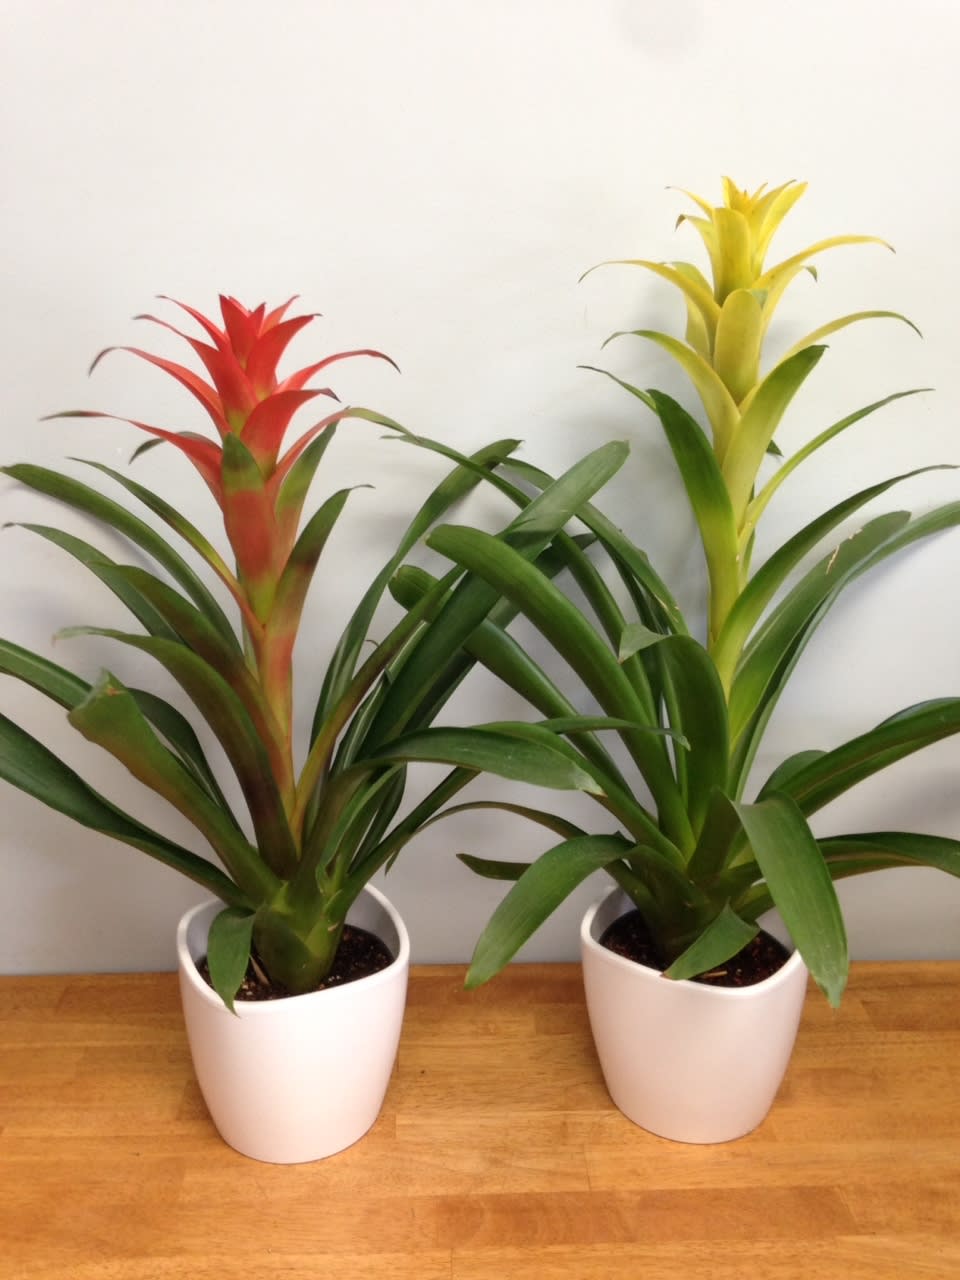 Bromeliad Plant In Ceramic - Bromeliad plants bring an exotic feel and a touch of the tropics right to your home. Growing a bromeliad as a houseplant is easy and brings interesting texture and color to any room. Only water plant once the top two inches are dry. Do not water excessively; bromeliads can handle dry conditions. This bright tropical house plant arrives in a simple ceramic container, a great gift for any friend or family.